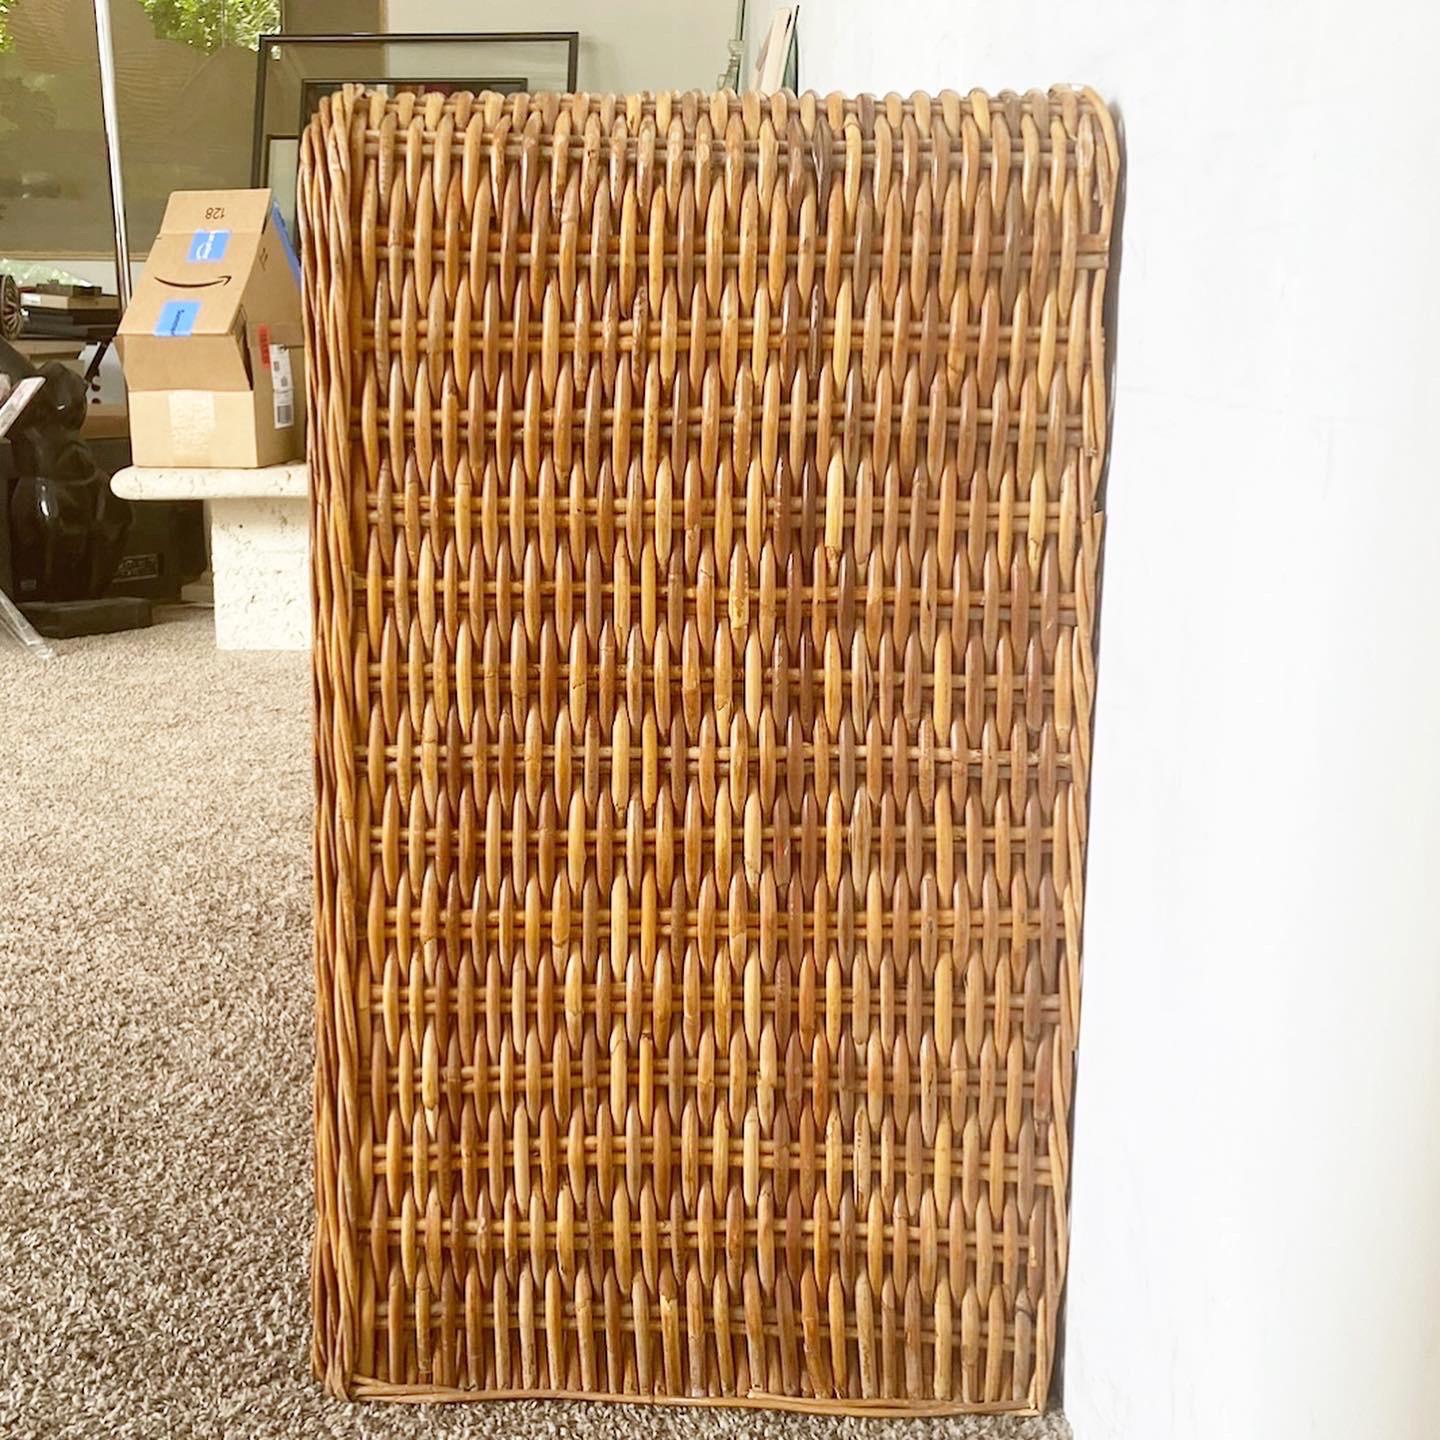 Boho Chic Woven Reed Wicker Waterfall Dresser In Good Condition For Sale In Delray Beach, FL